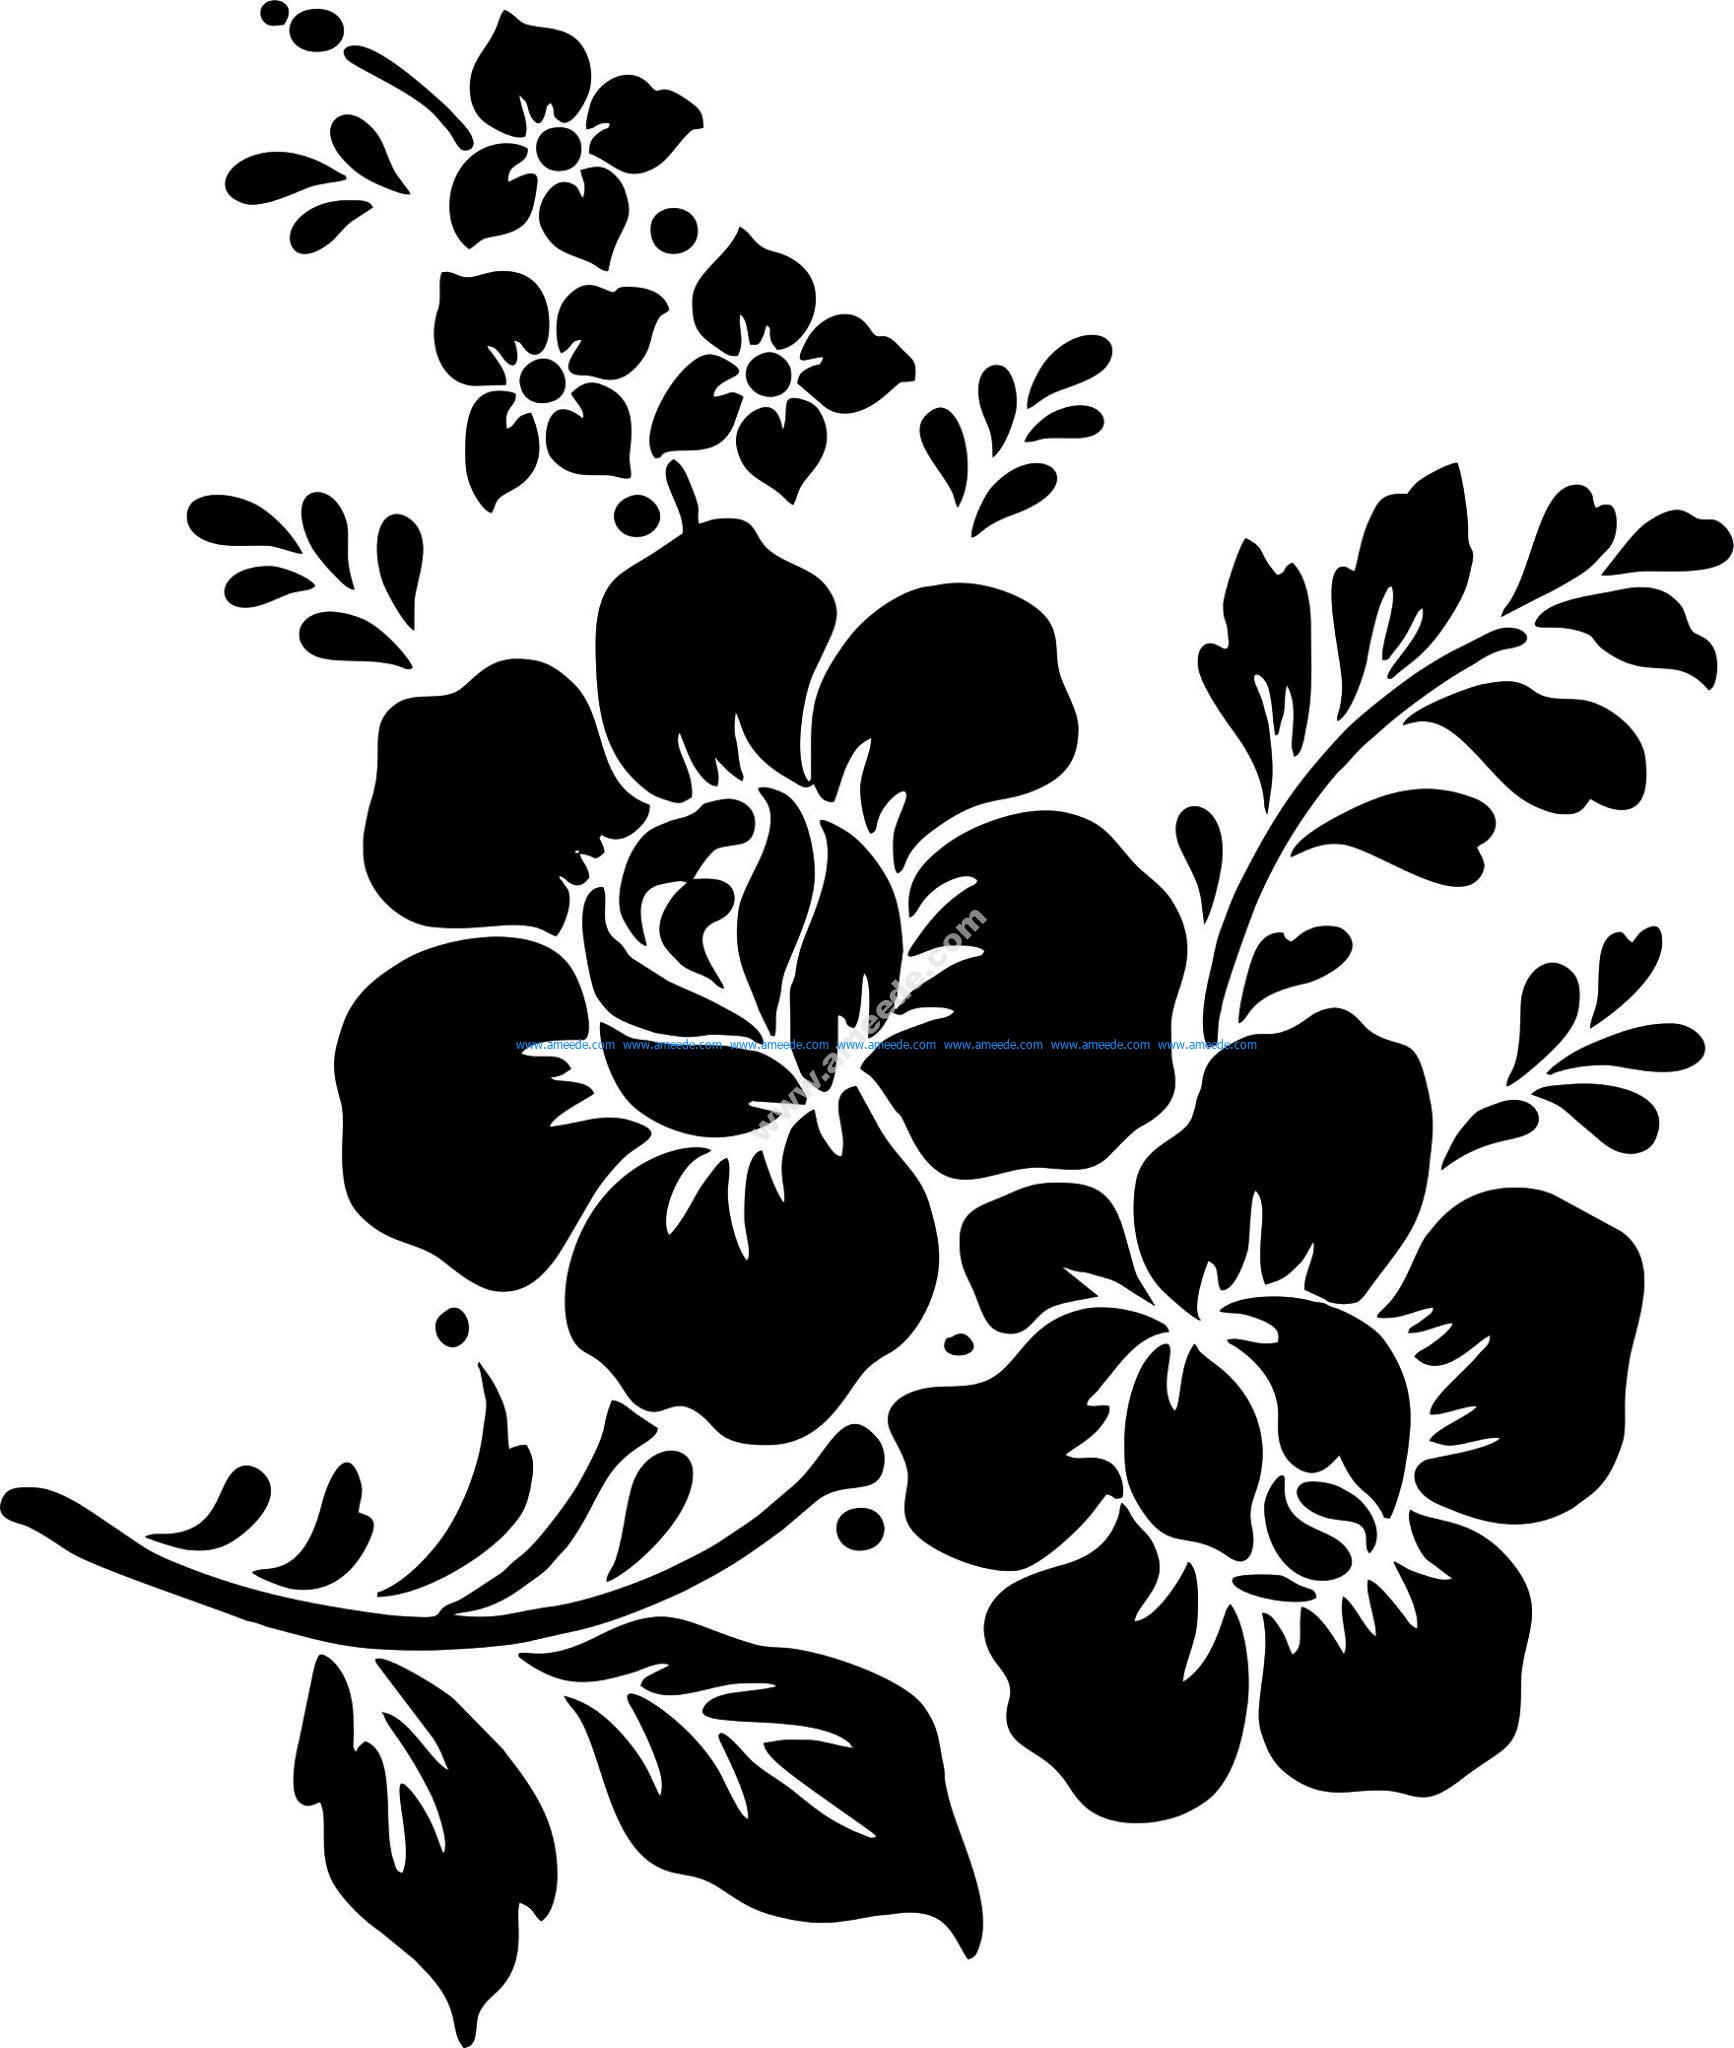 Vector Flower Svg Free - 69+ DXF Include